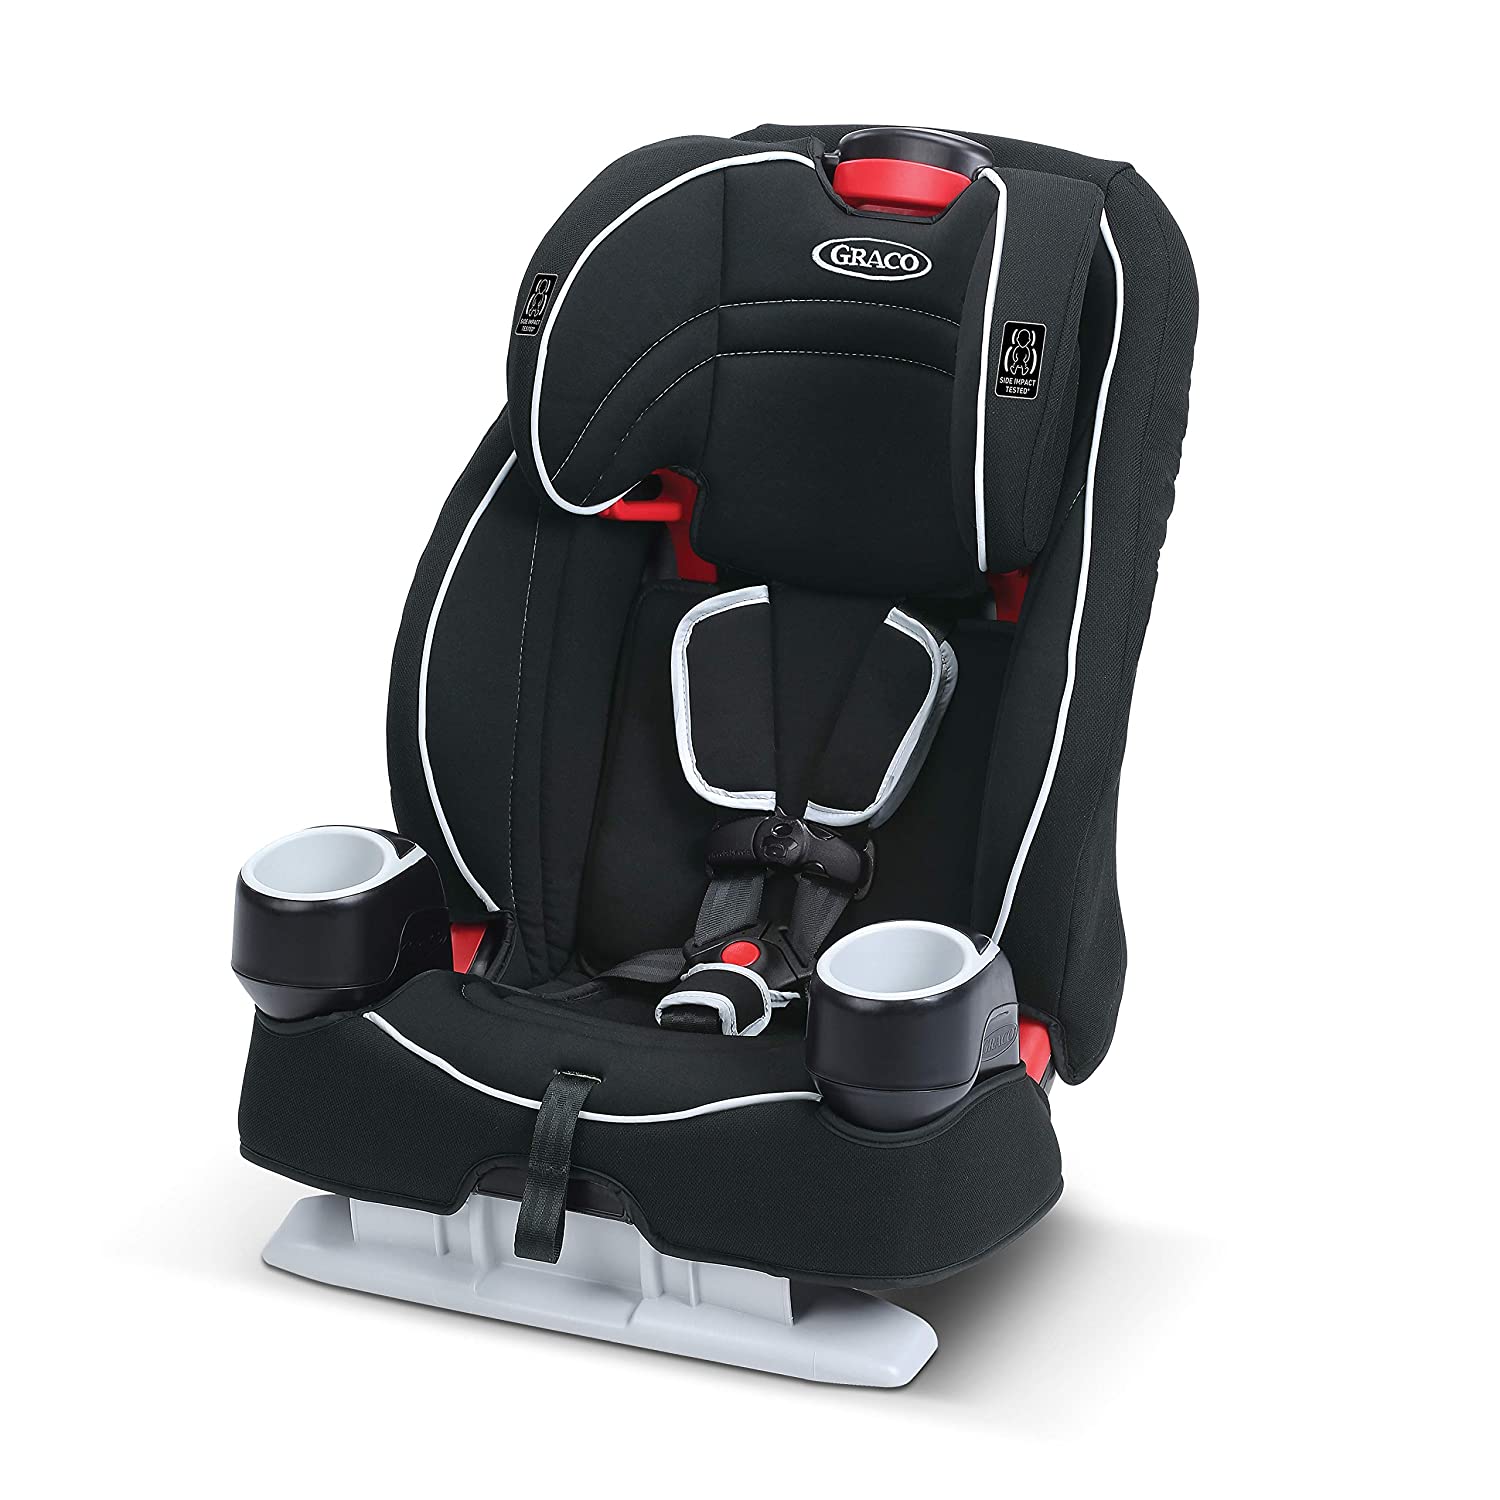 Evenflo Maestro Booster Car Seat: Easy to Install, Highly Portable, and  Light on the Wallet - Safe Convertible Car Seats